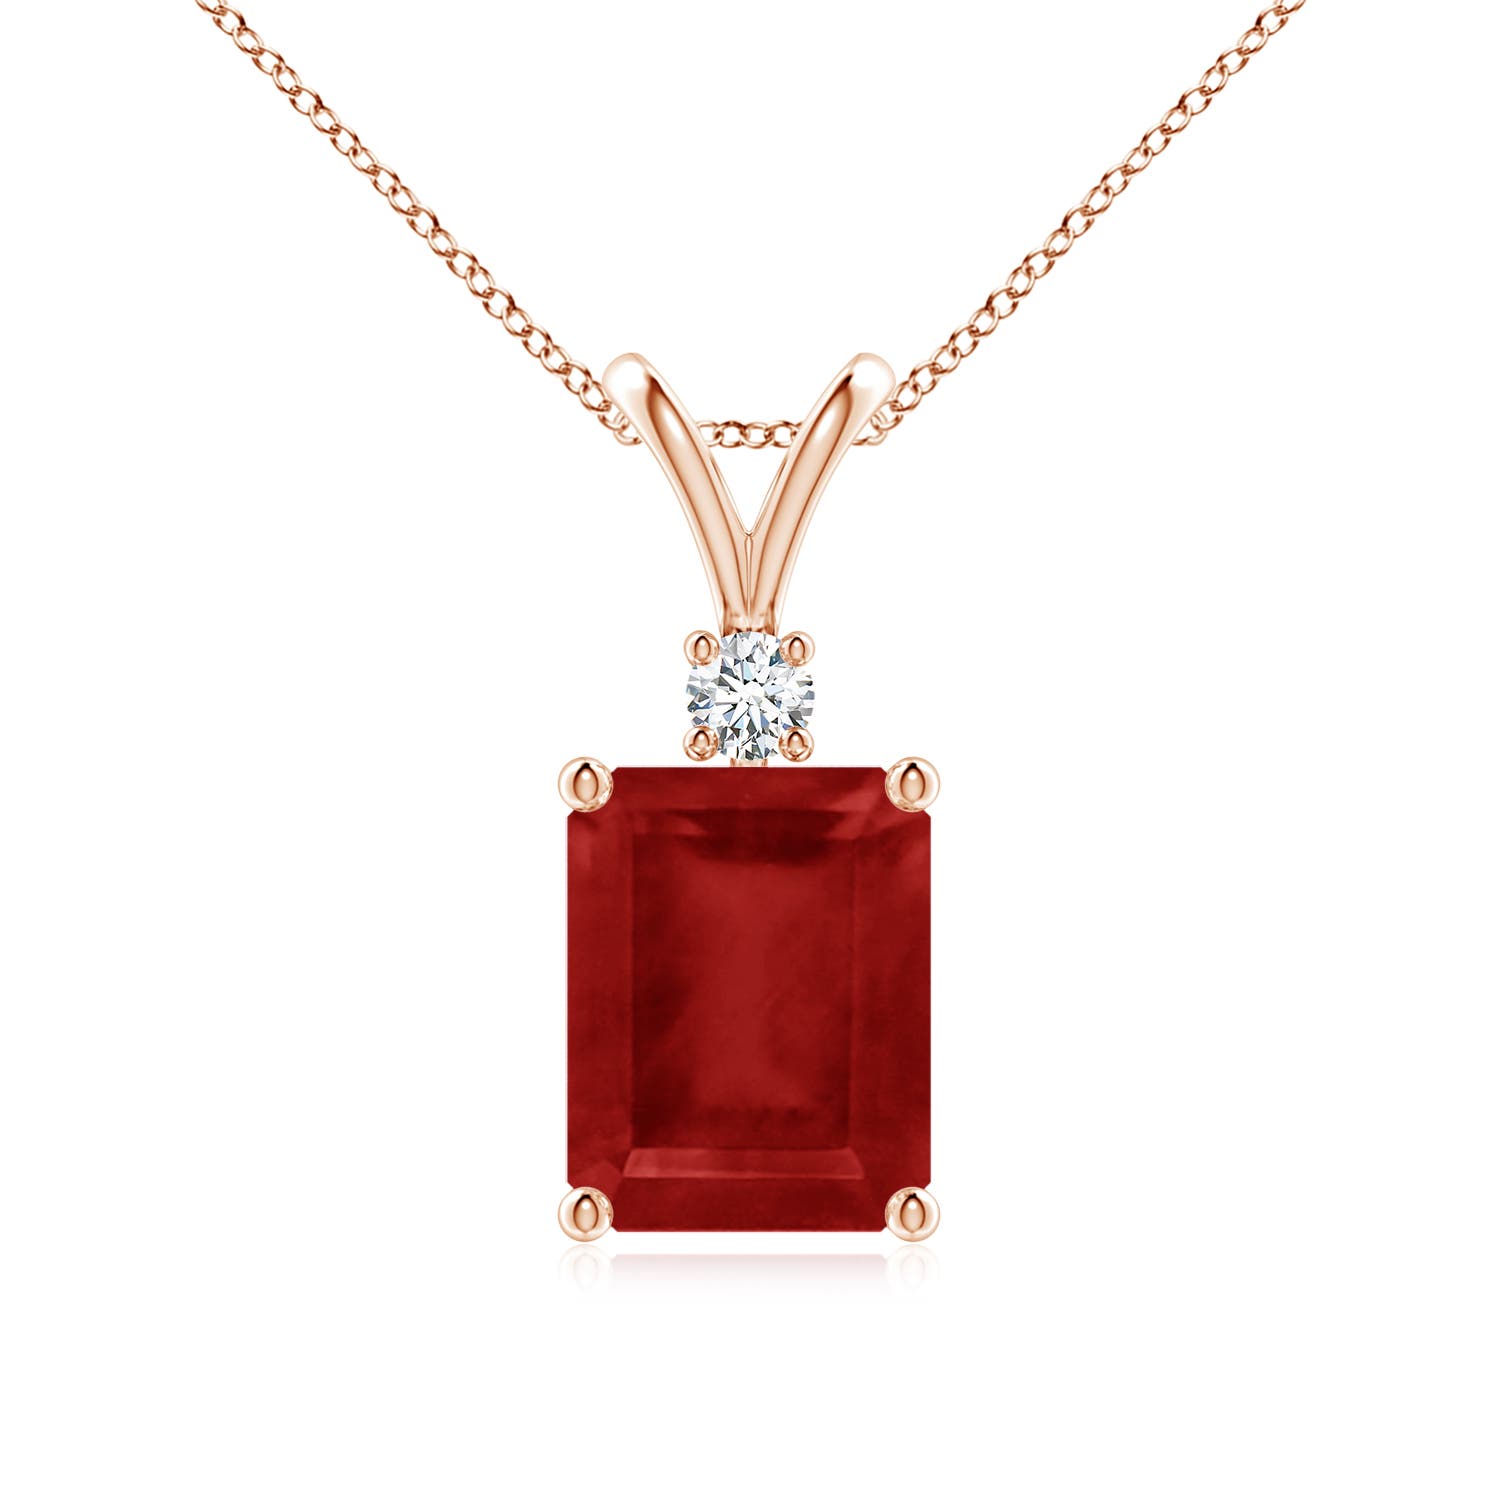 AA - Ruby / 3.07 CT / 14 KT Rose Gold